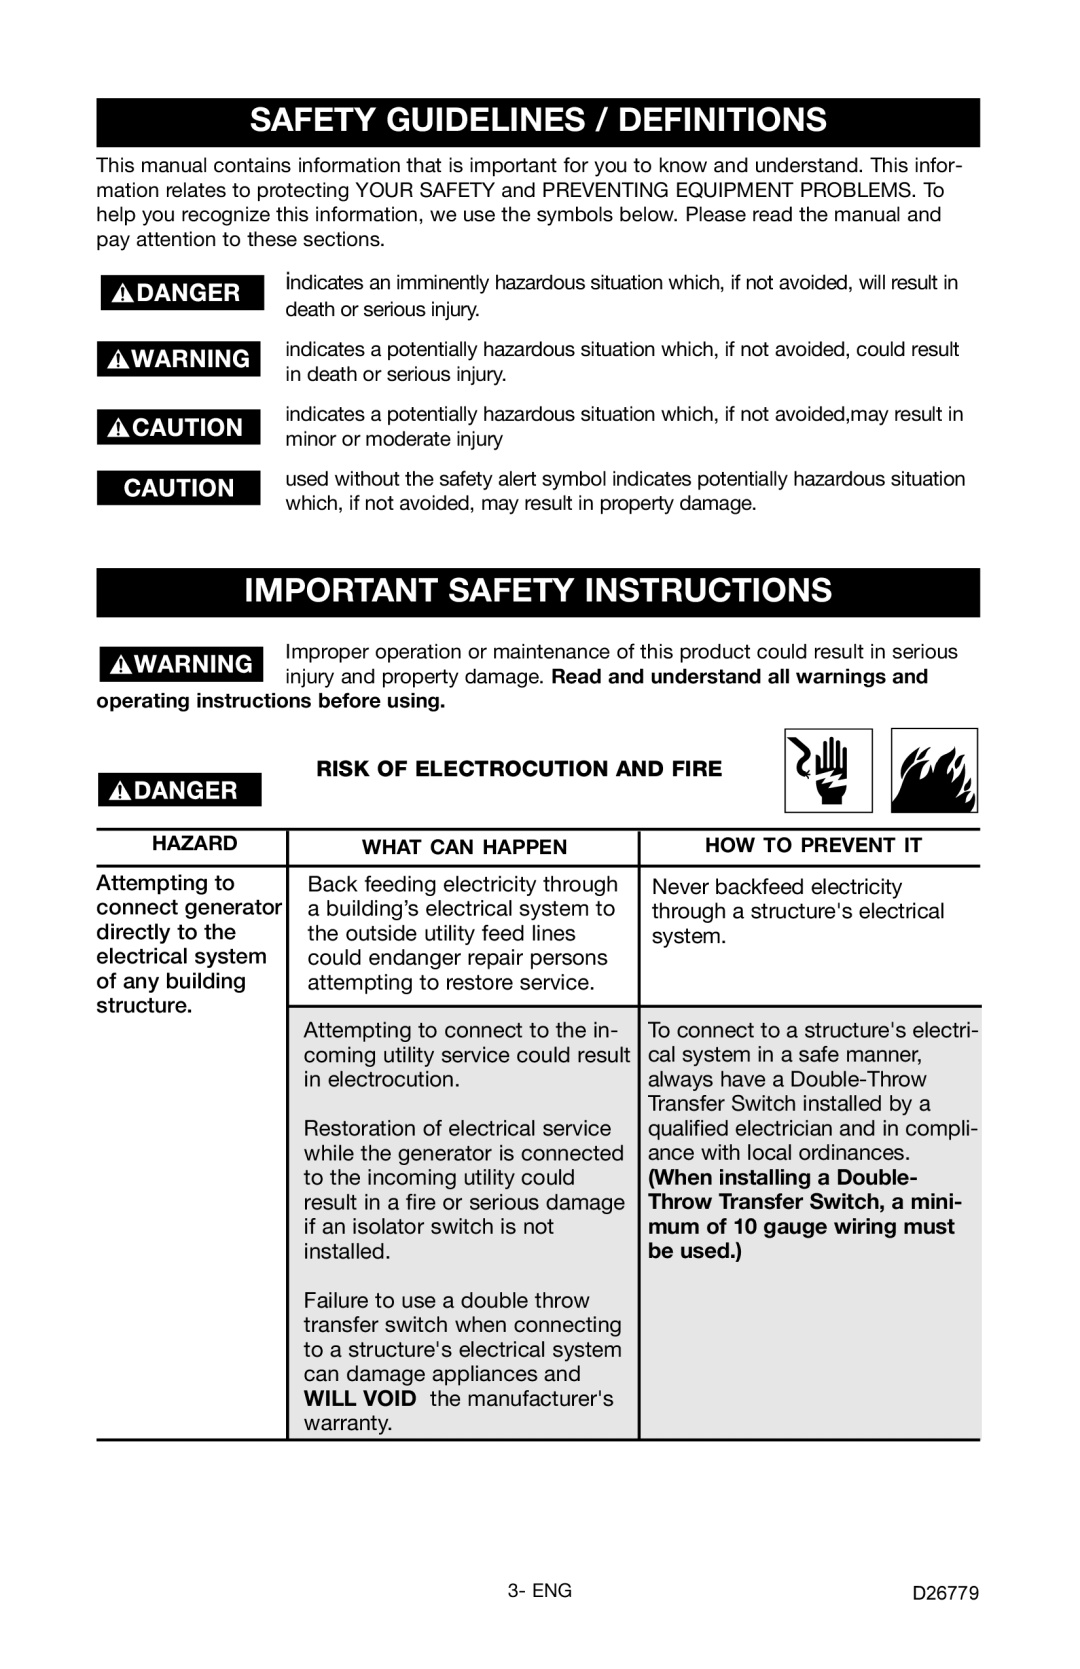 Porter-Cable D26779-028-0 Safety Guidelines / Definitions, Important Safety Instructions, Risk Of Electrocution And Fire 